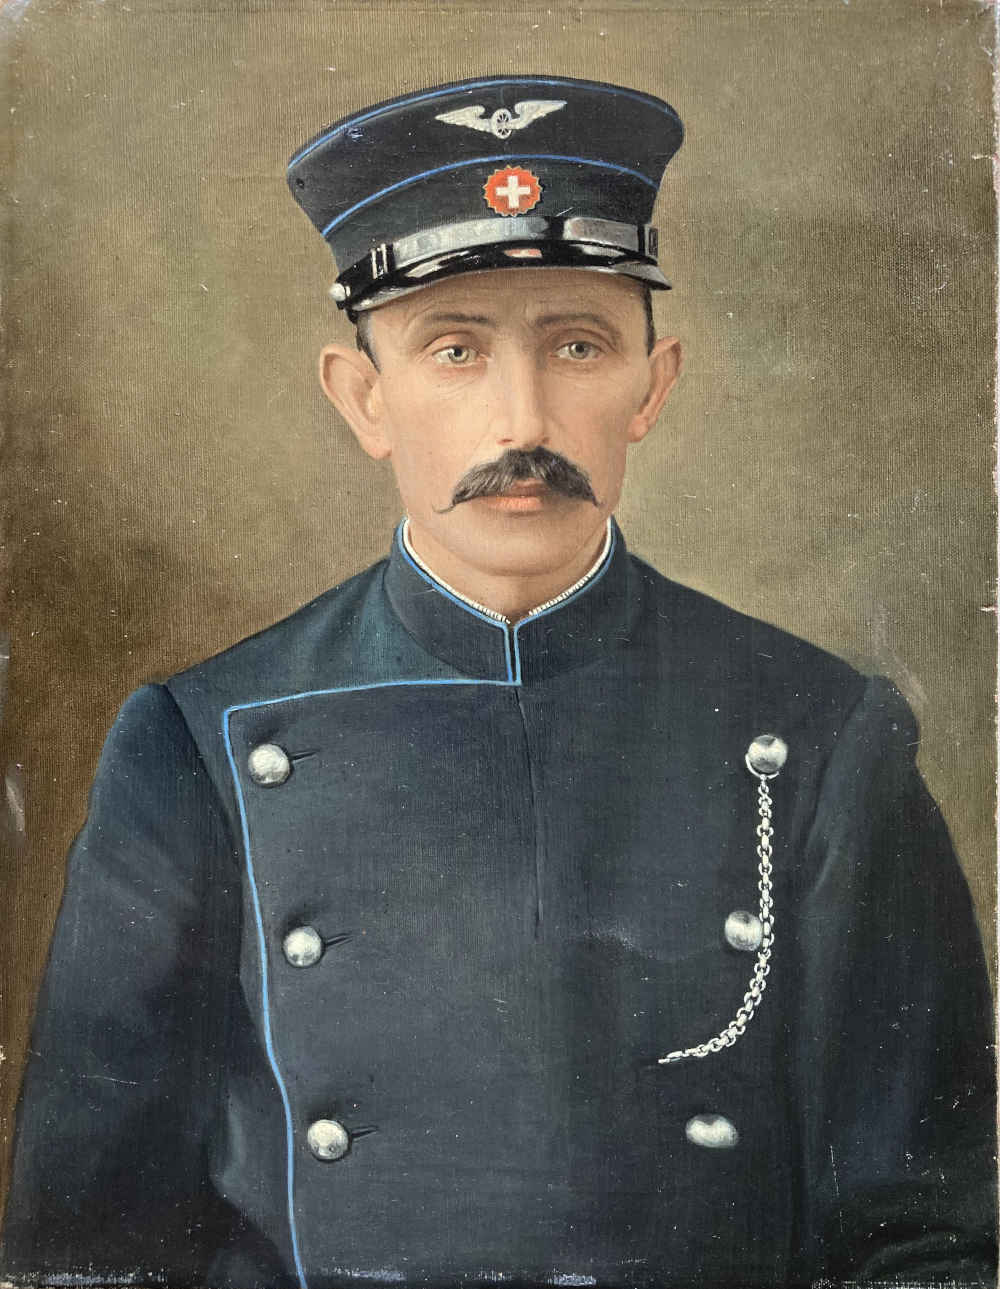 Railway worker on oil painting, SBB conductor, passenger attendant in SBB uniform from 1902-1932.